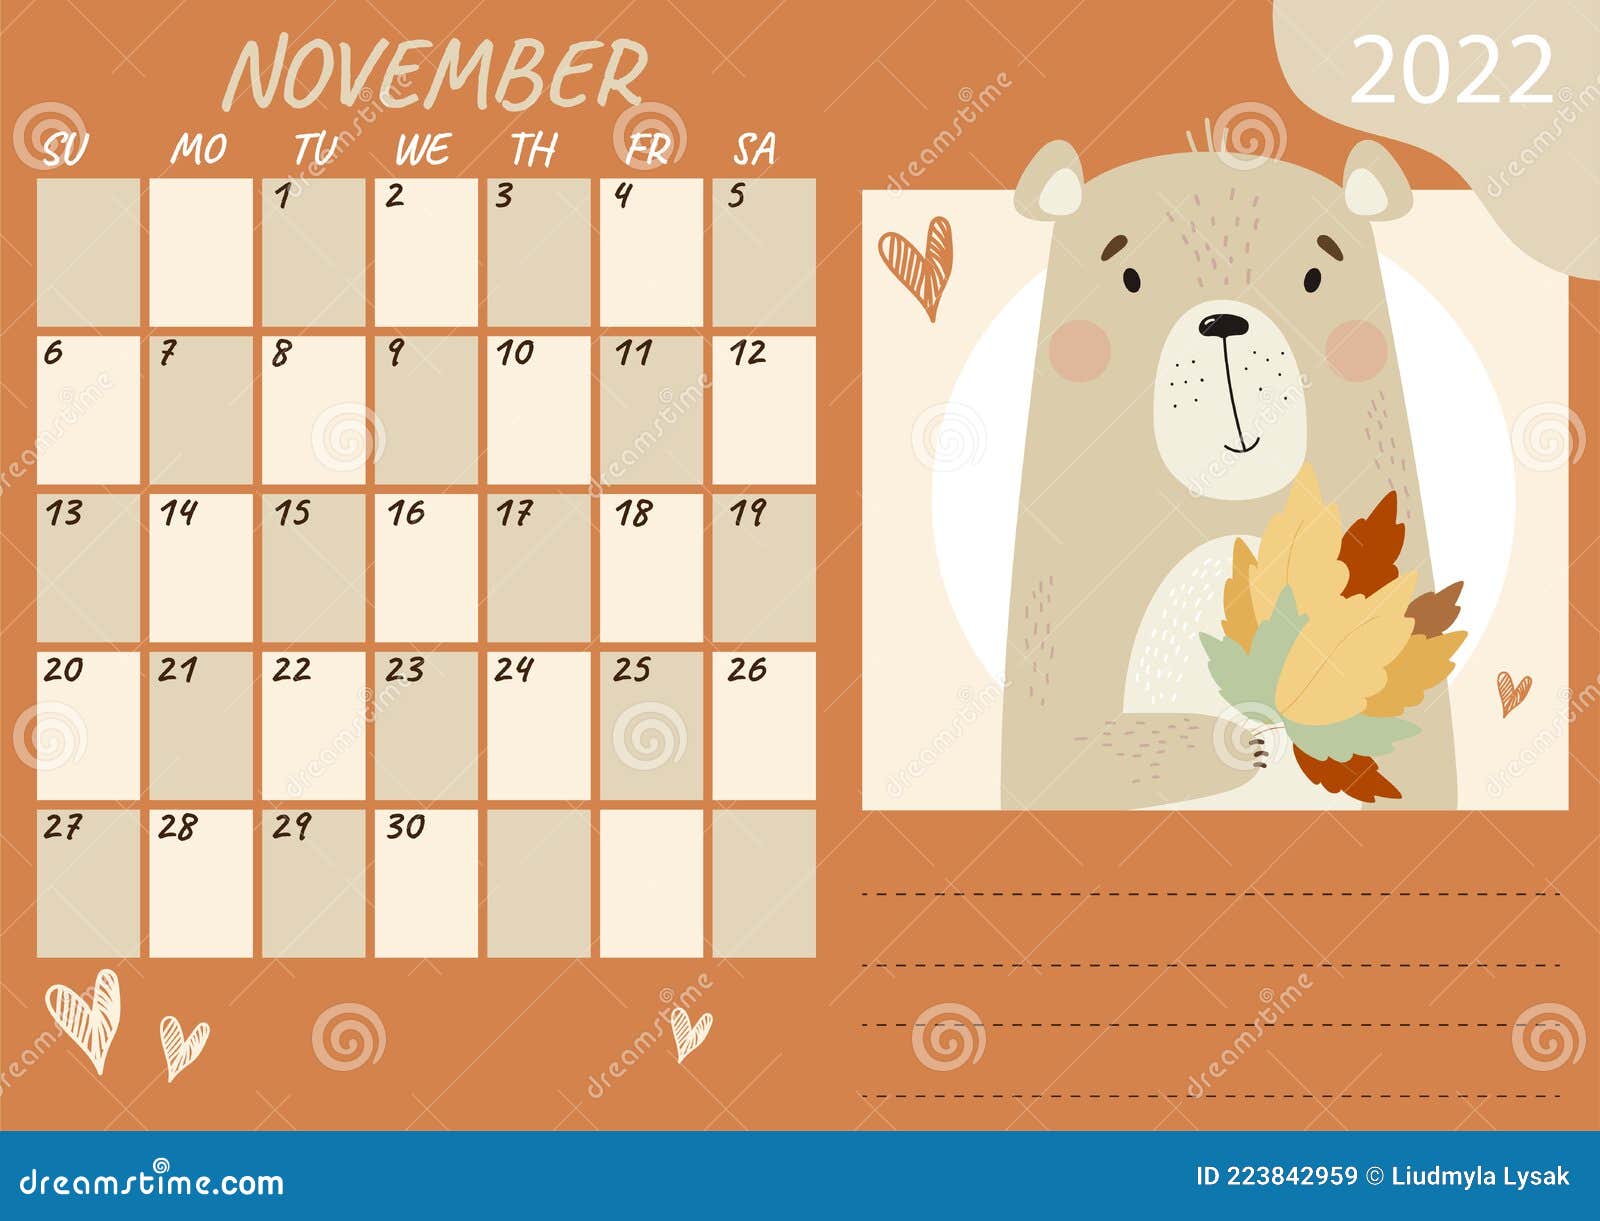 Nov 2022 Calendar Planner Calendar Template For November 2022. Cute Teddy Bear With A Bouquet  Of Autumn Leaves. Vector Illustration. Week From Stock Vector -  Illustration Of Kids, Collection: 223842959